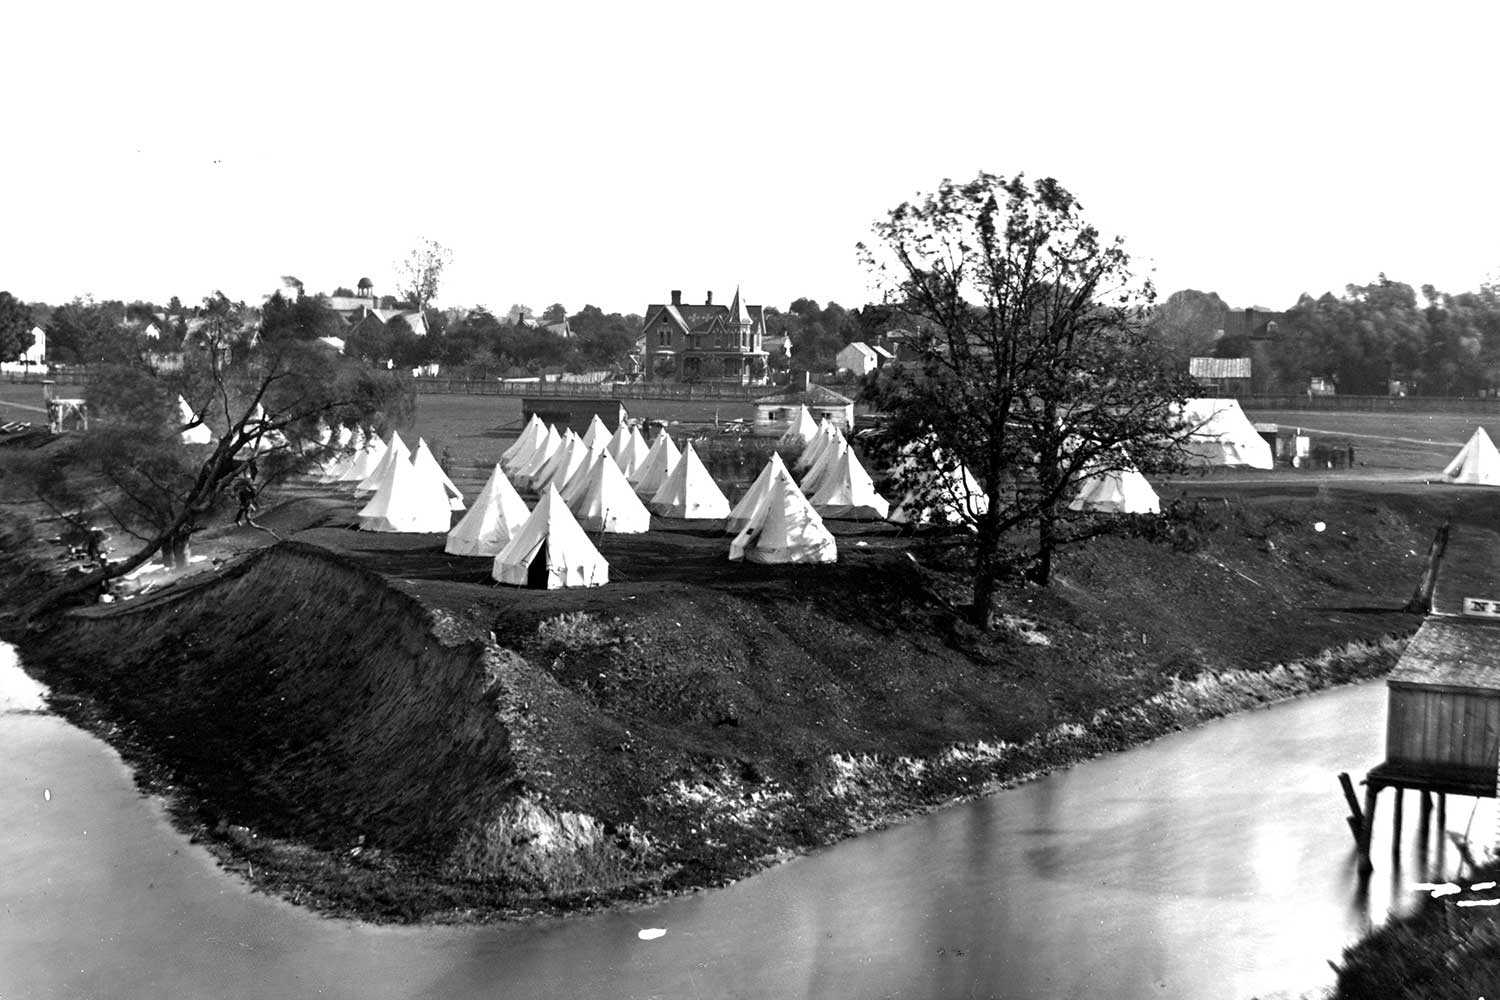 A military encampment at Tecumseh Park, c. 1885. Tecumseh Park has been a military reserve since 1794 when Simcoe ordered the establishment of a shipyard on this site.